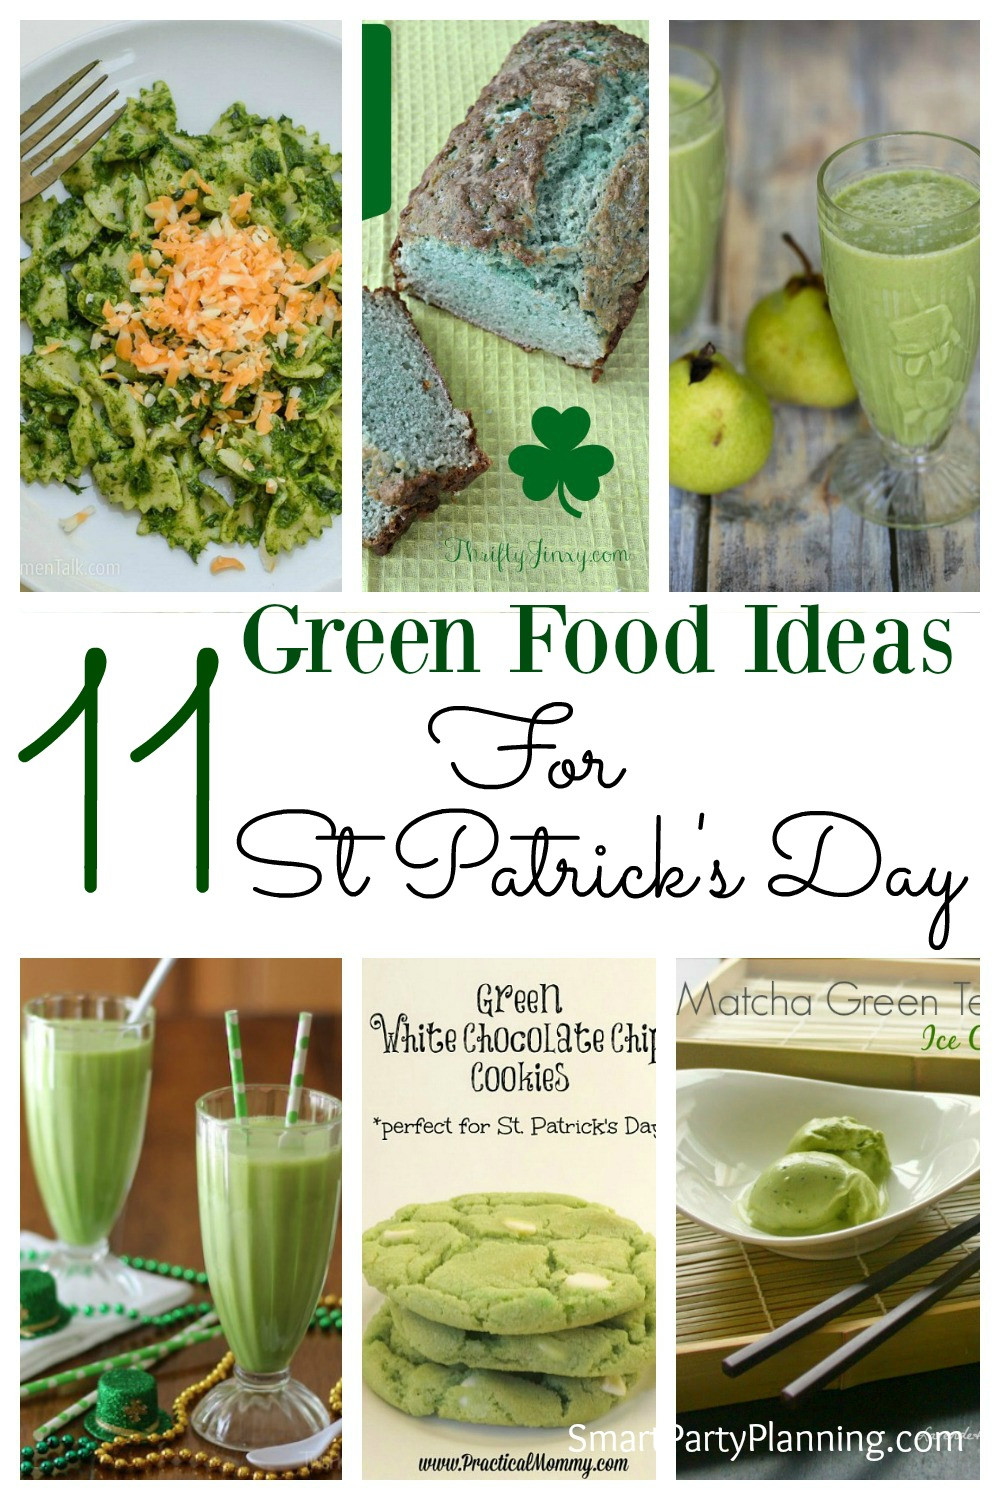 St. Patrick's Day Food Ideas
 11 Green Food Ideas For St Patrick s Day